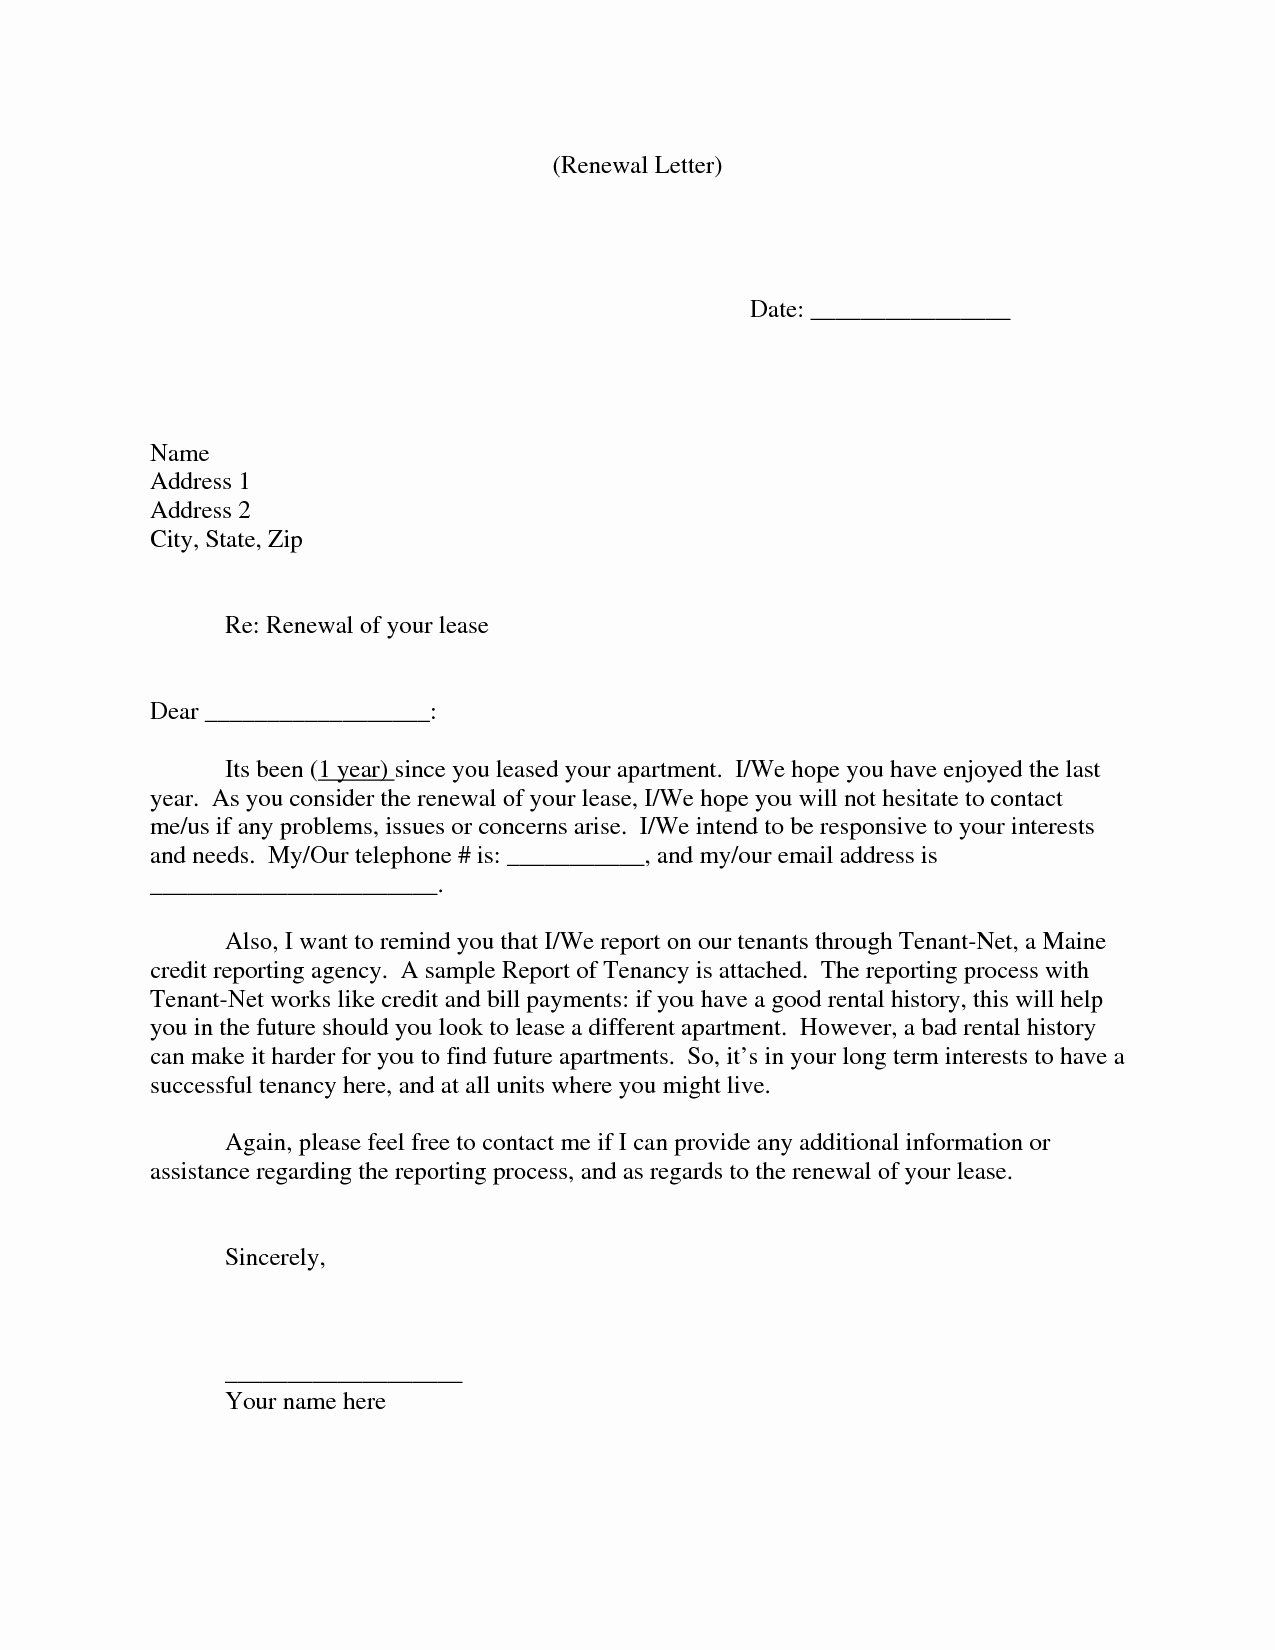 Letter for Not Renewing Lease Fresh Sample Not Renewing Lease Letter Choice Image Download